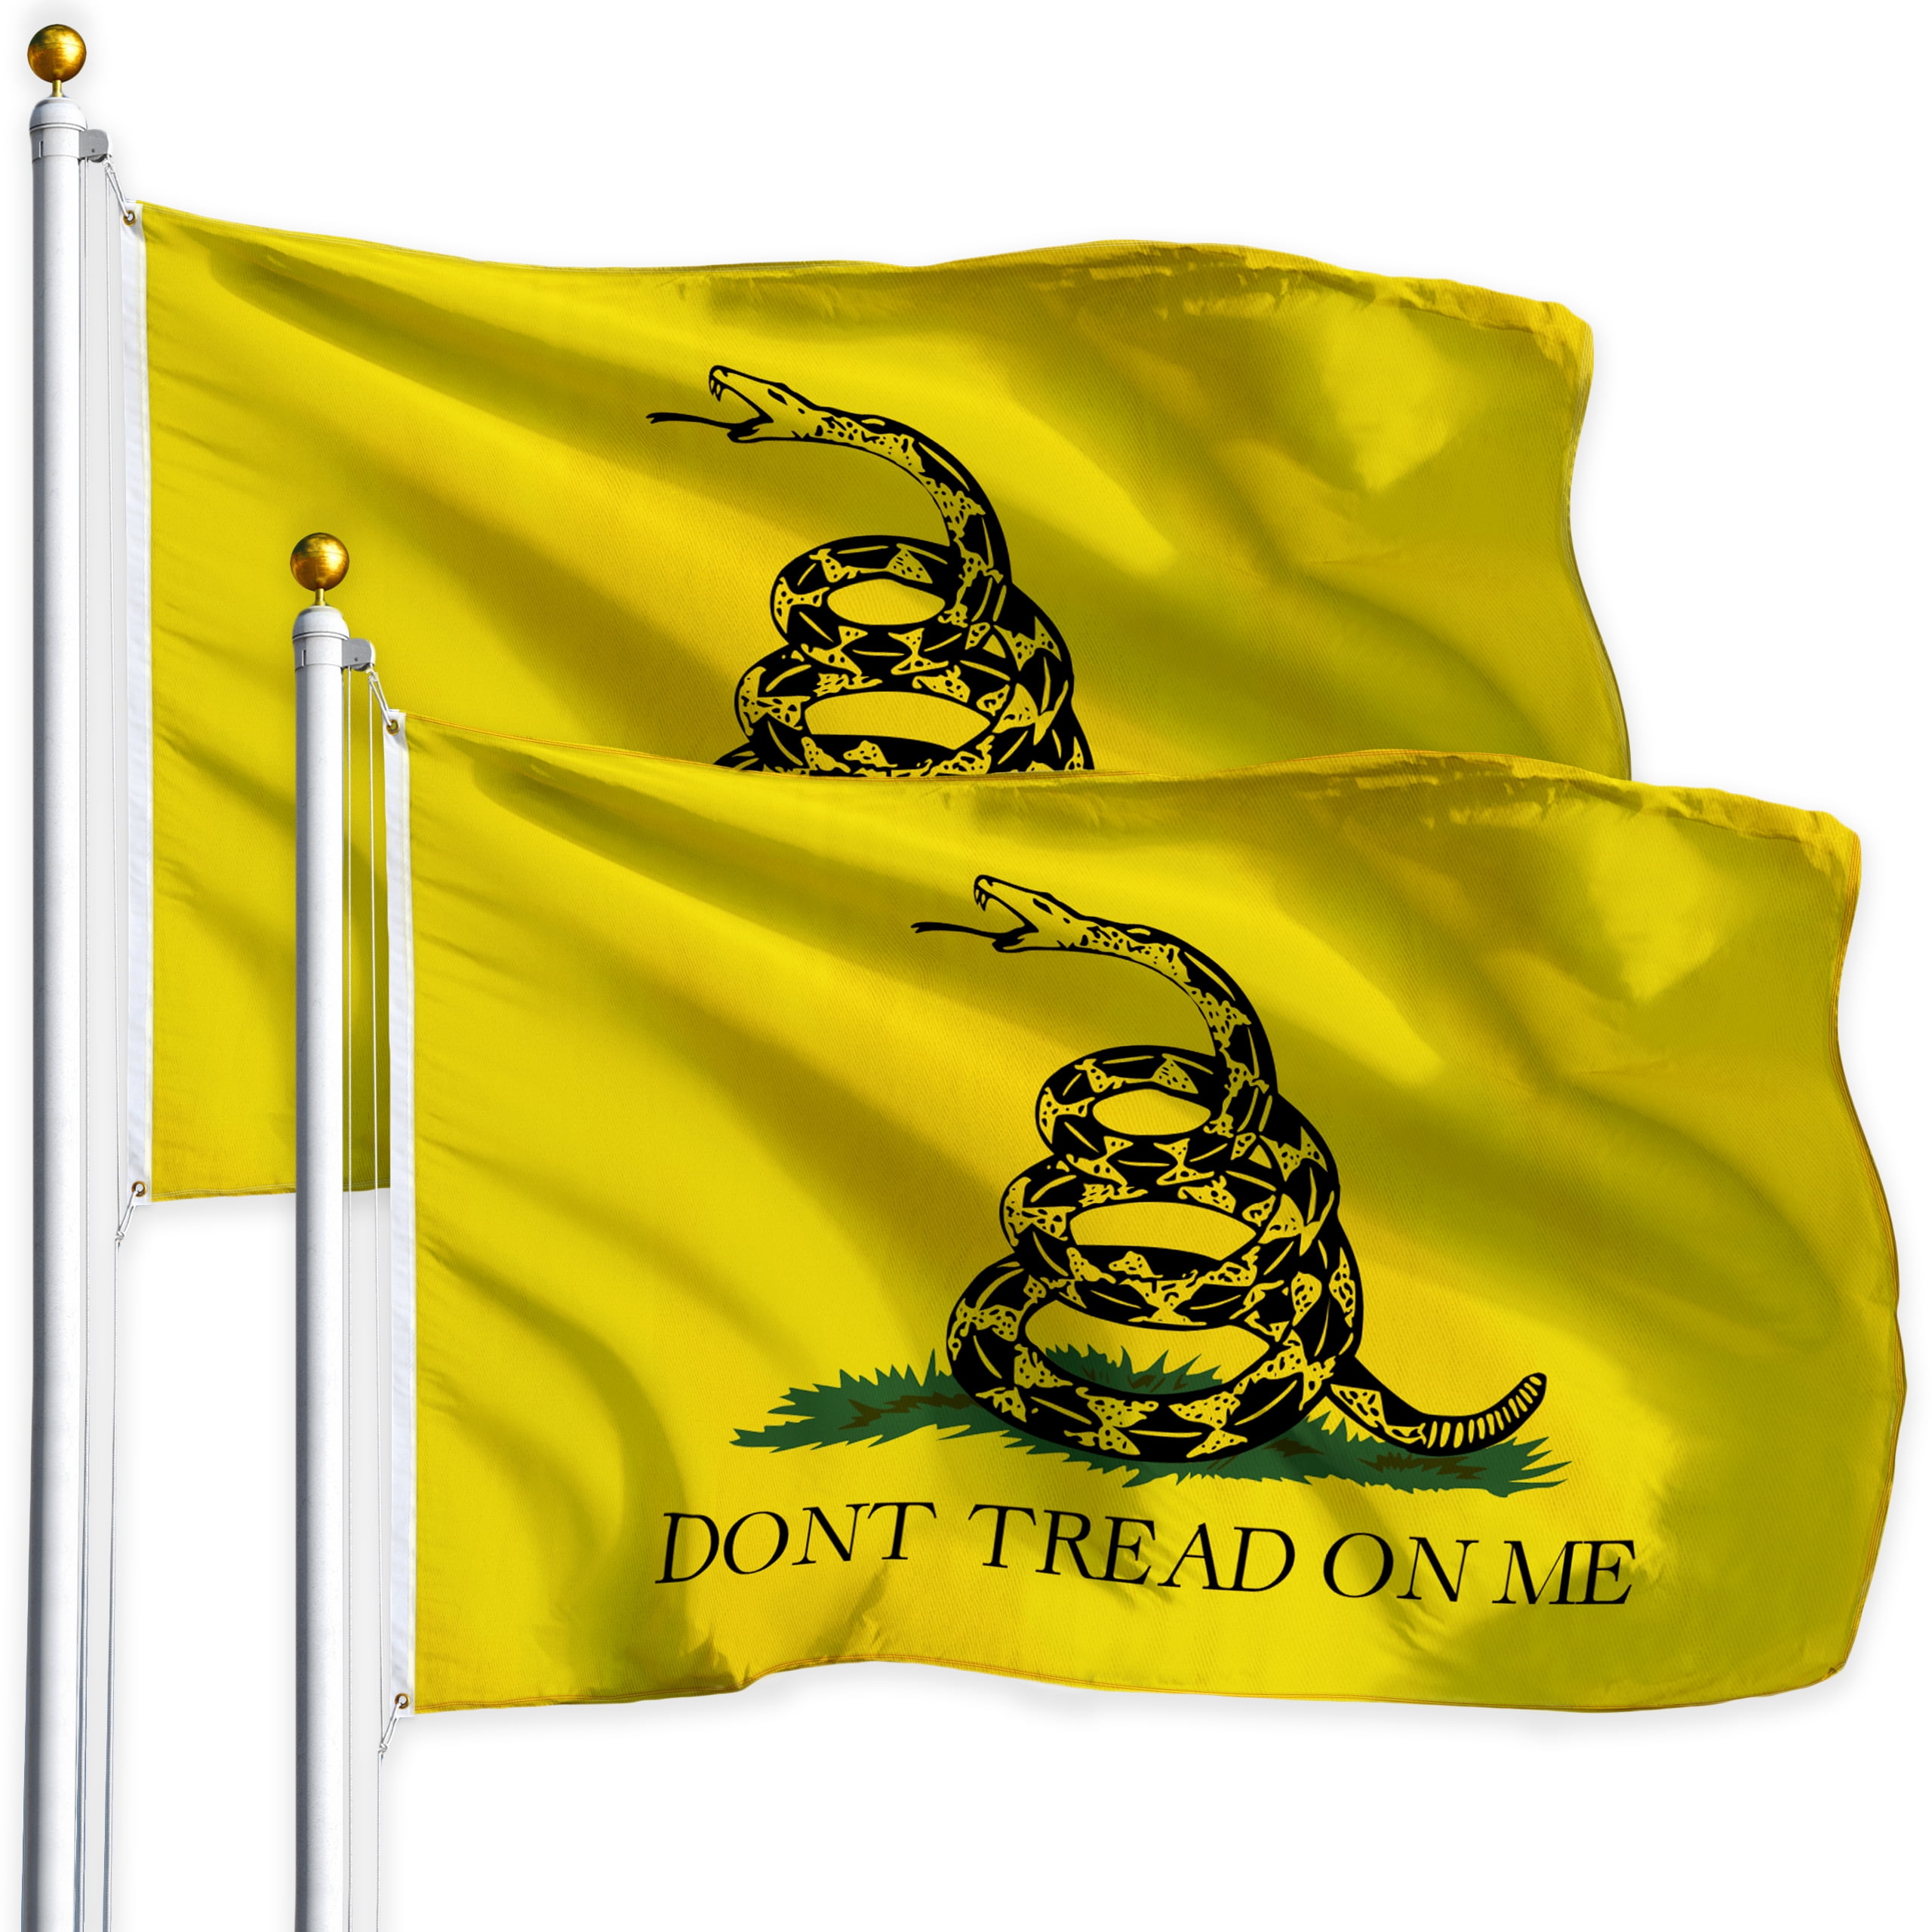 3' X 5' 3x5 Dont Don't Tread on Me Gadsden Flag Indoor Outdoor FAST USA SHIPPING 